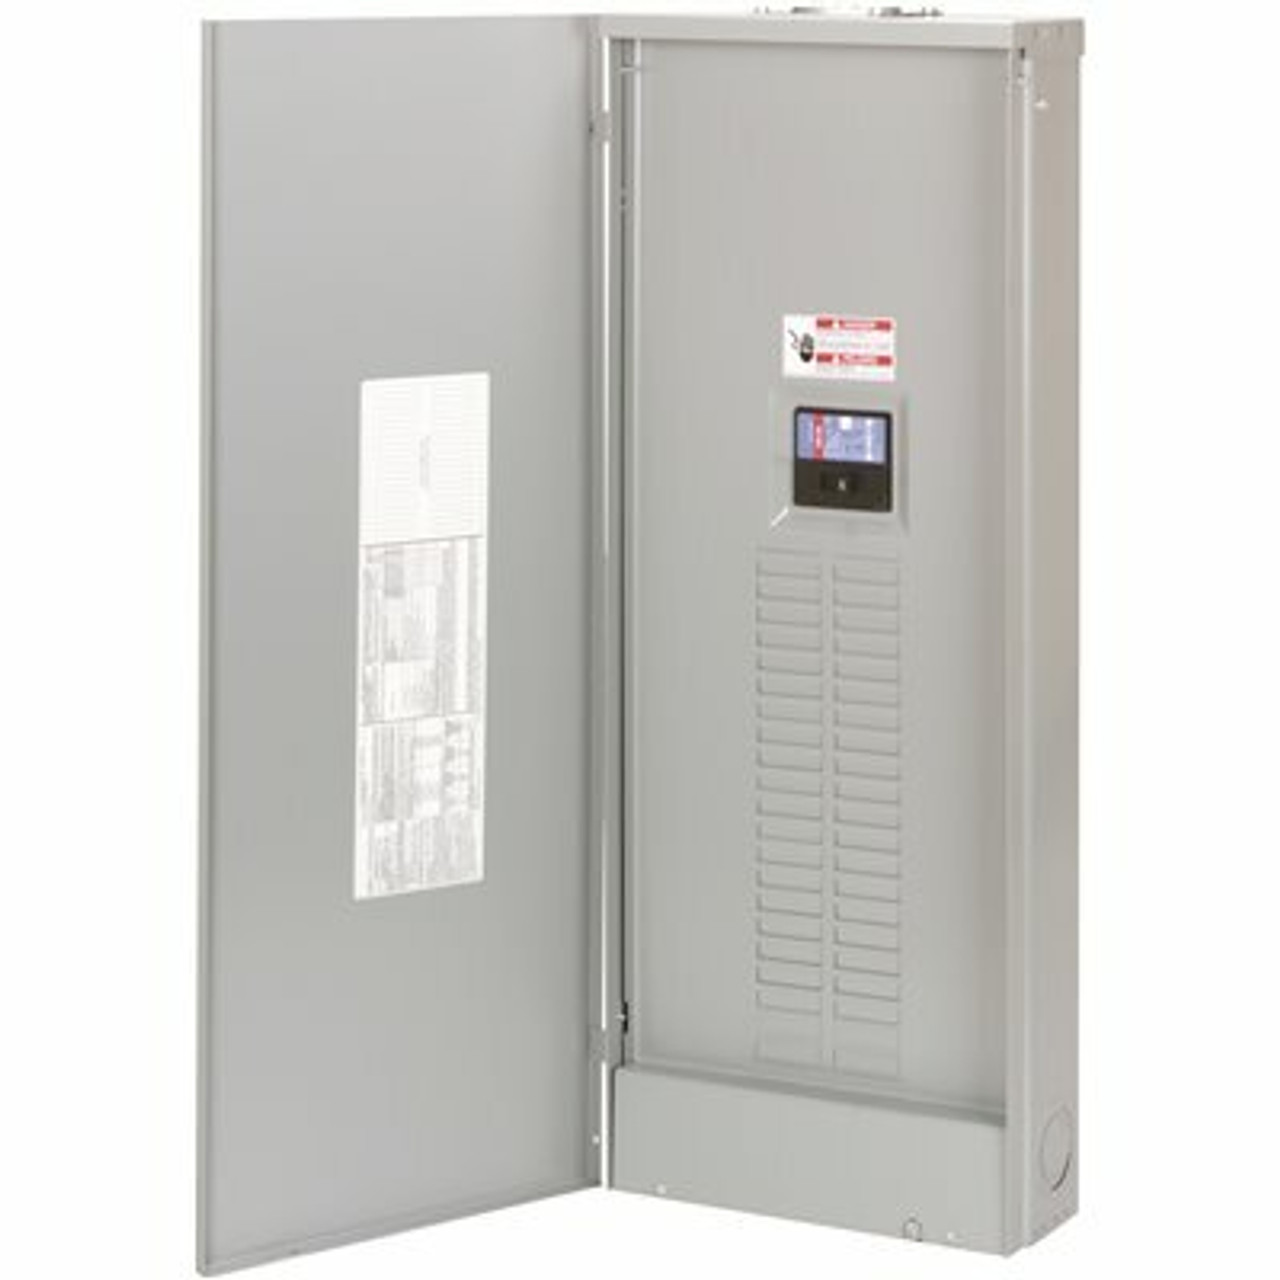 Eaton Ch 200 Amp 42 Circuit Outdoor Main Breaker Loadcenter With Nema 3R Cover